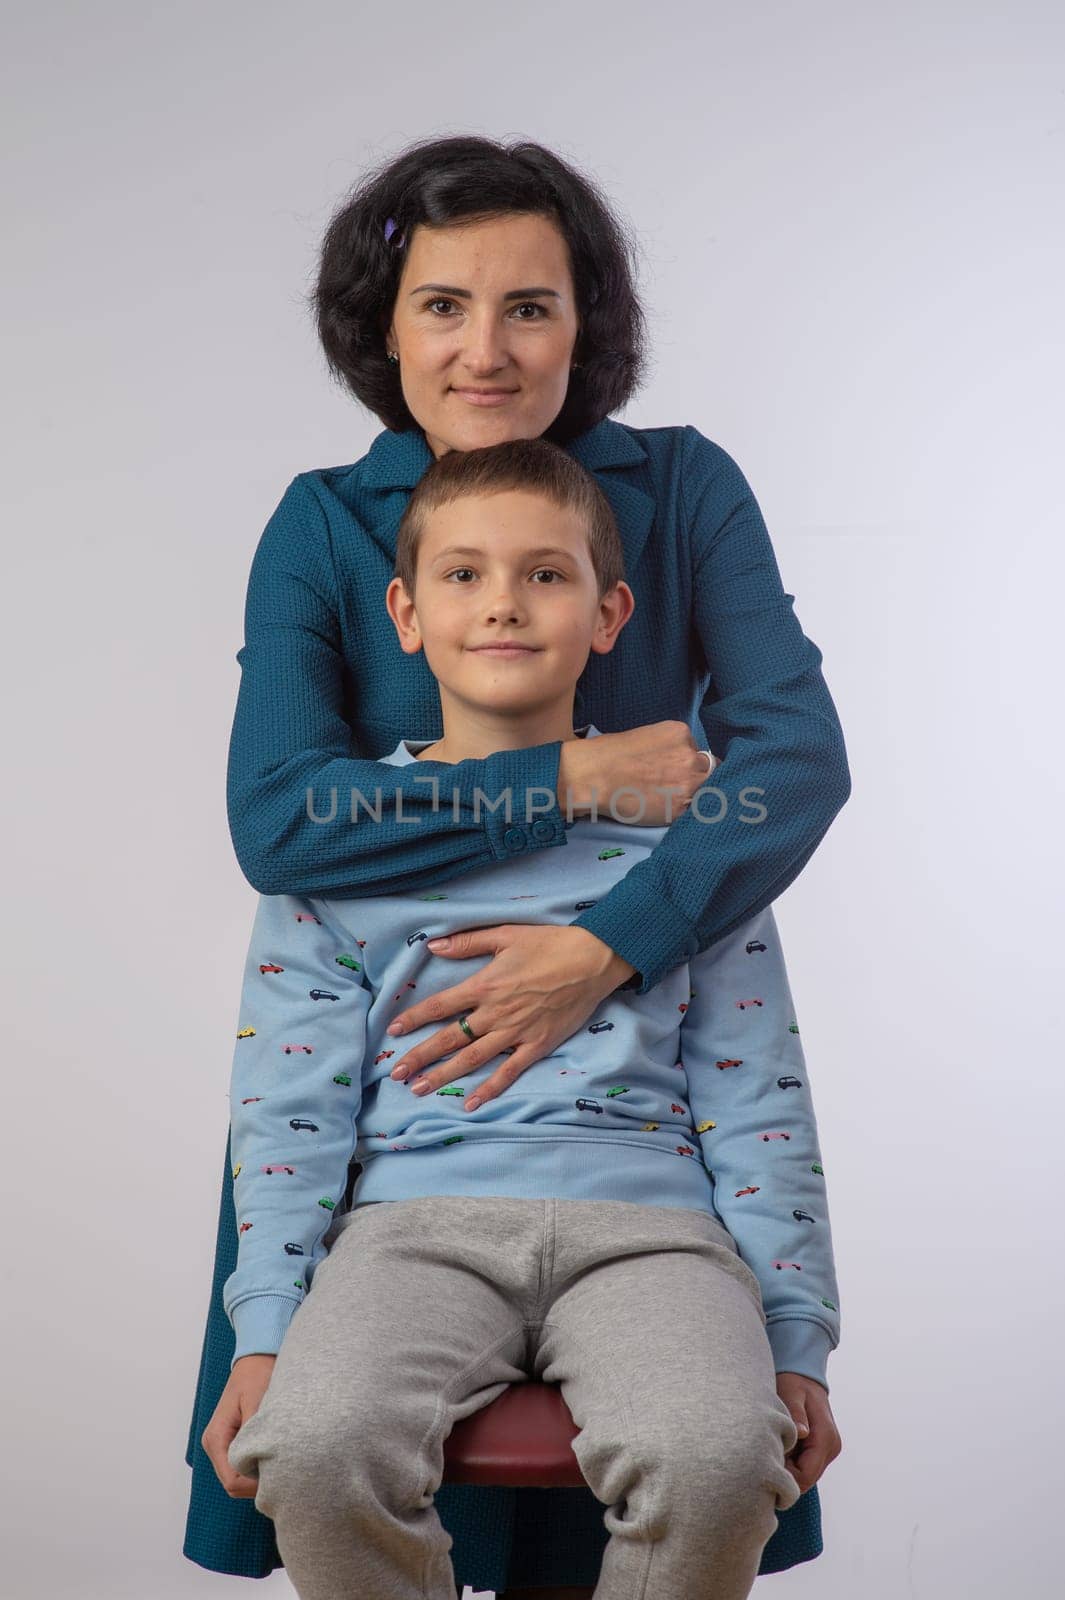 mother and son studio portrait happy family 1 by Mixa74